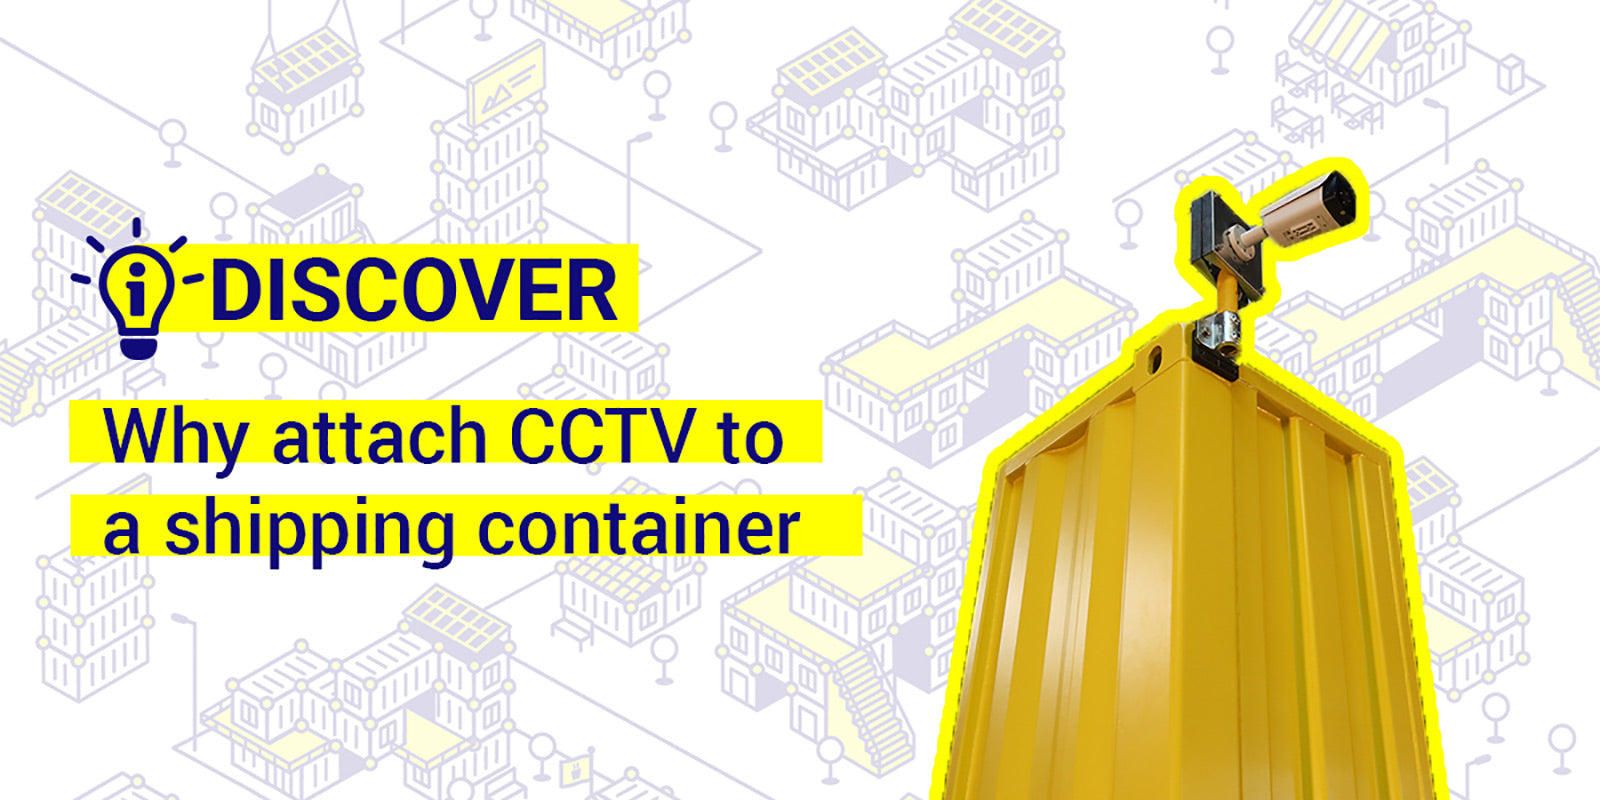 Why attach CCTV to a shipping container?